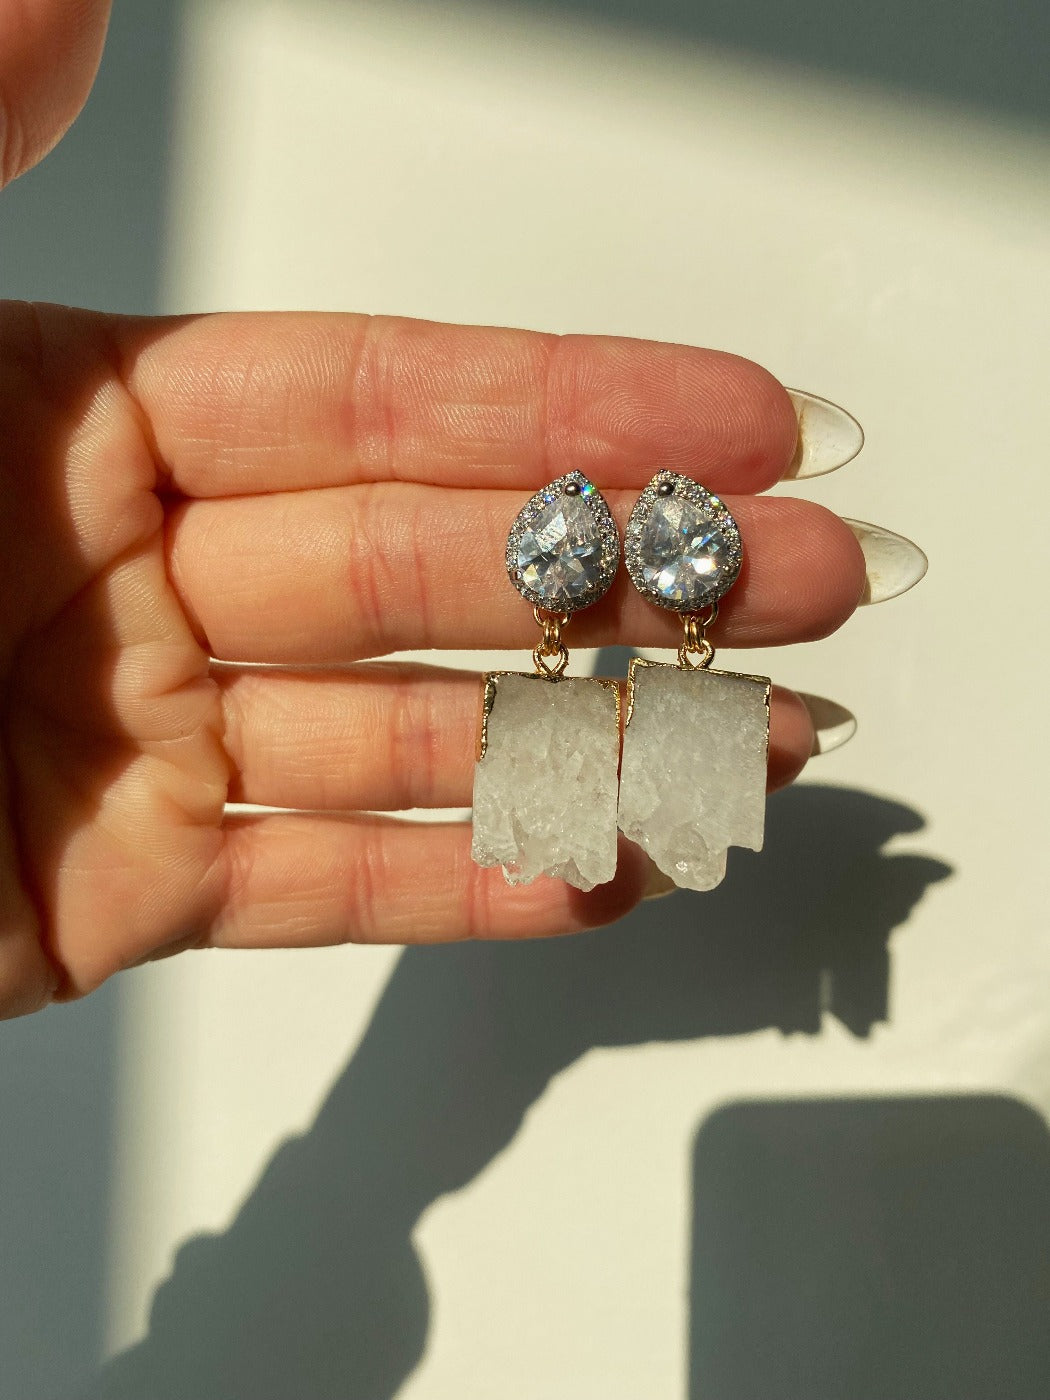 White amethyst geode CZ statement earrings for bride and bridesmaid